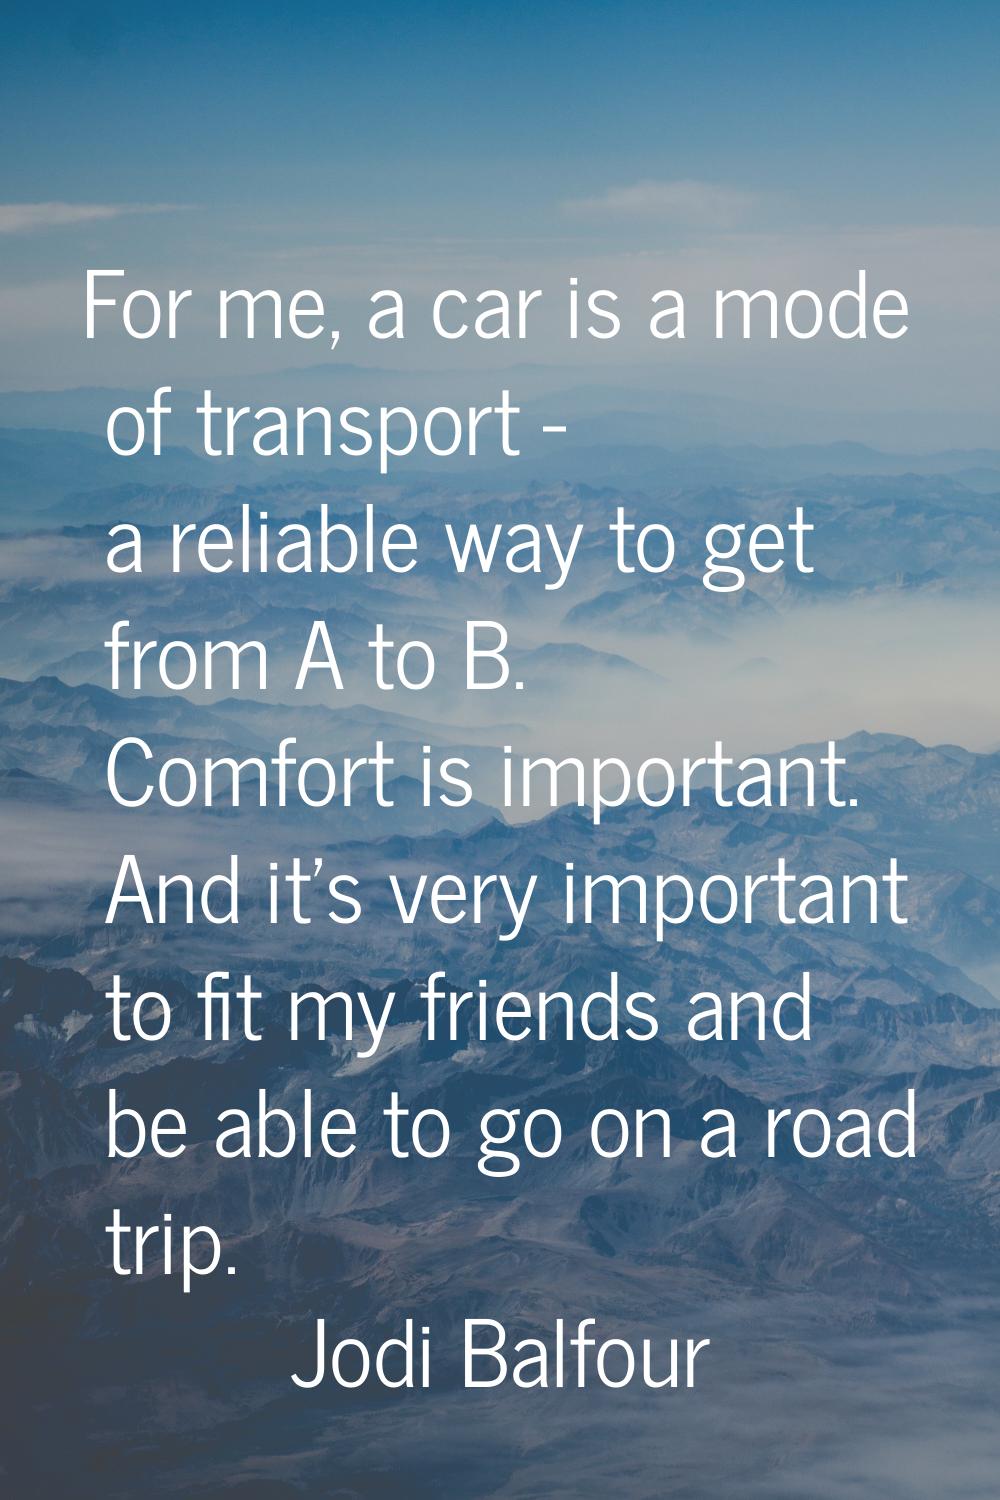 For me, a car is a mode of transport - a reliable way to get from A to B. Comfort is important. And